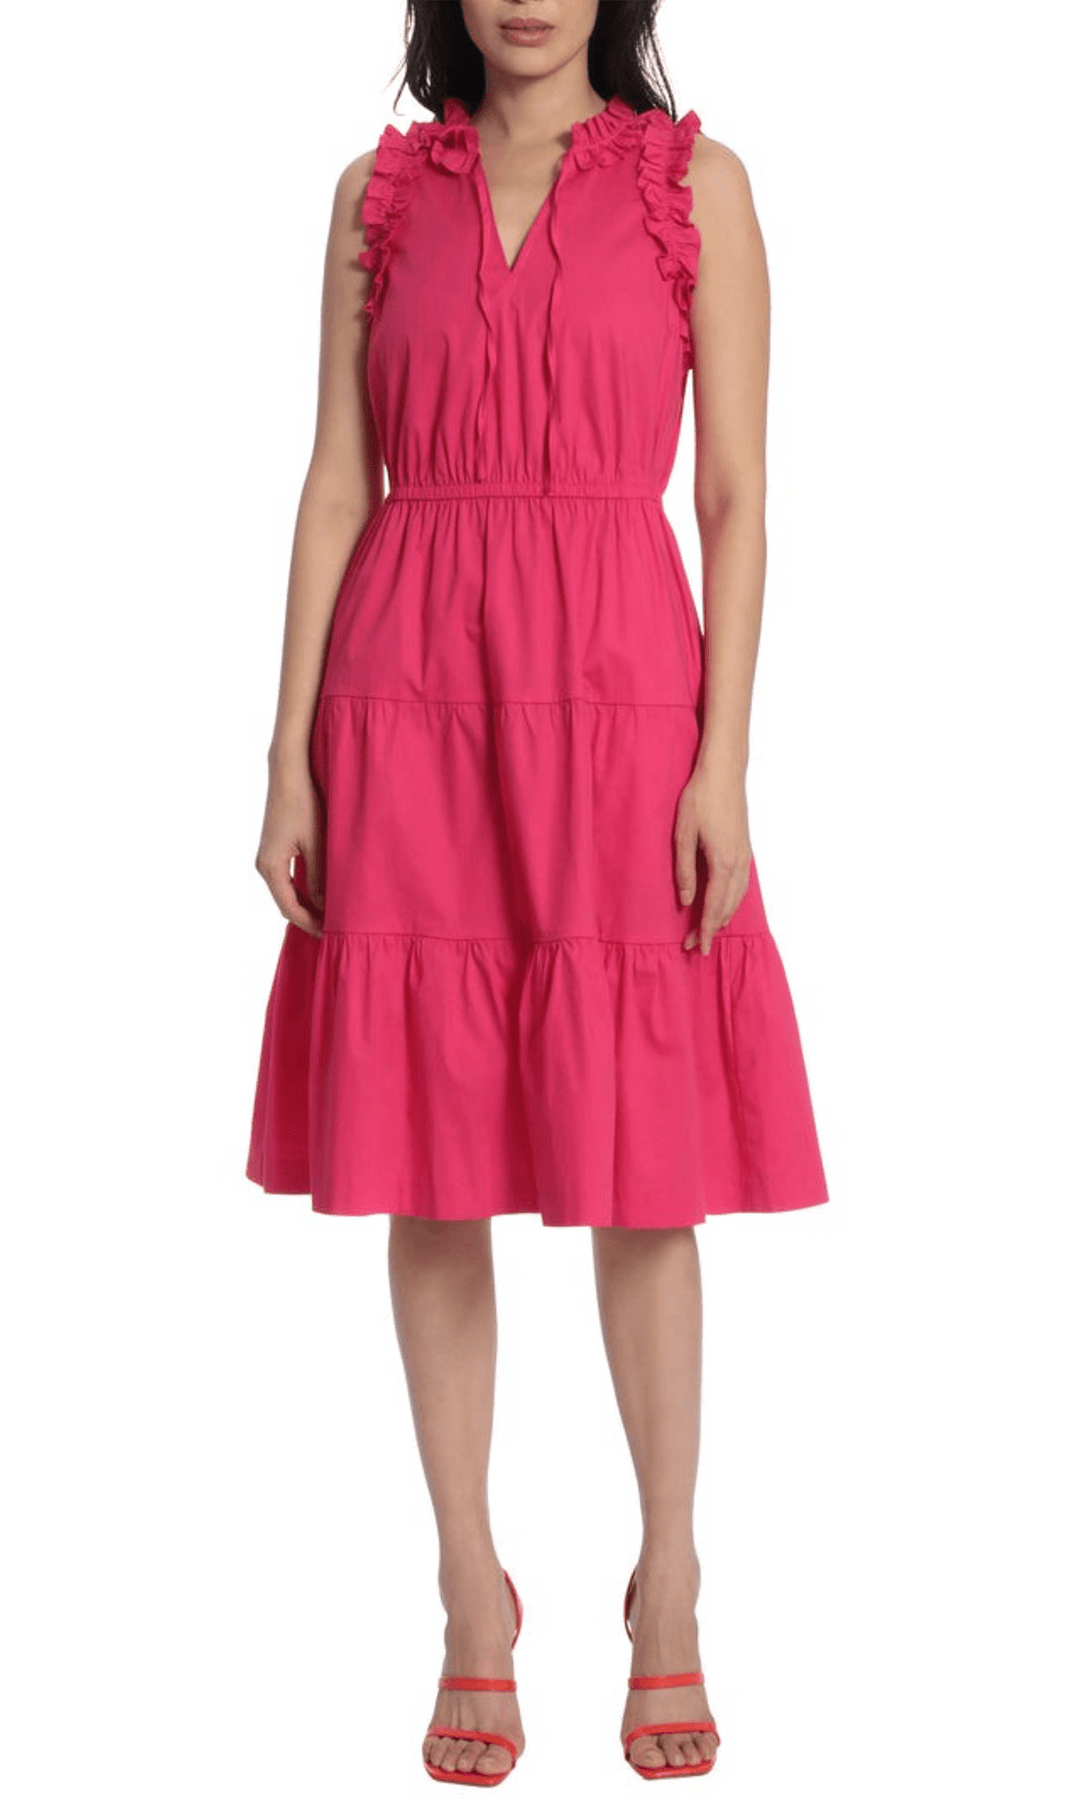 Maggy London G5174M - Ruffled Sleeve Midi Dress Special Occasion Dress 0 / Bright Rose